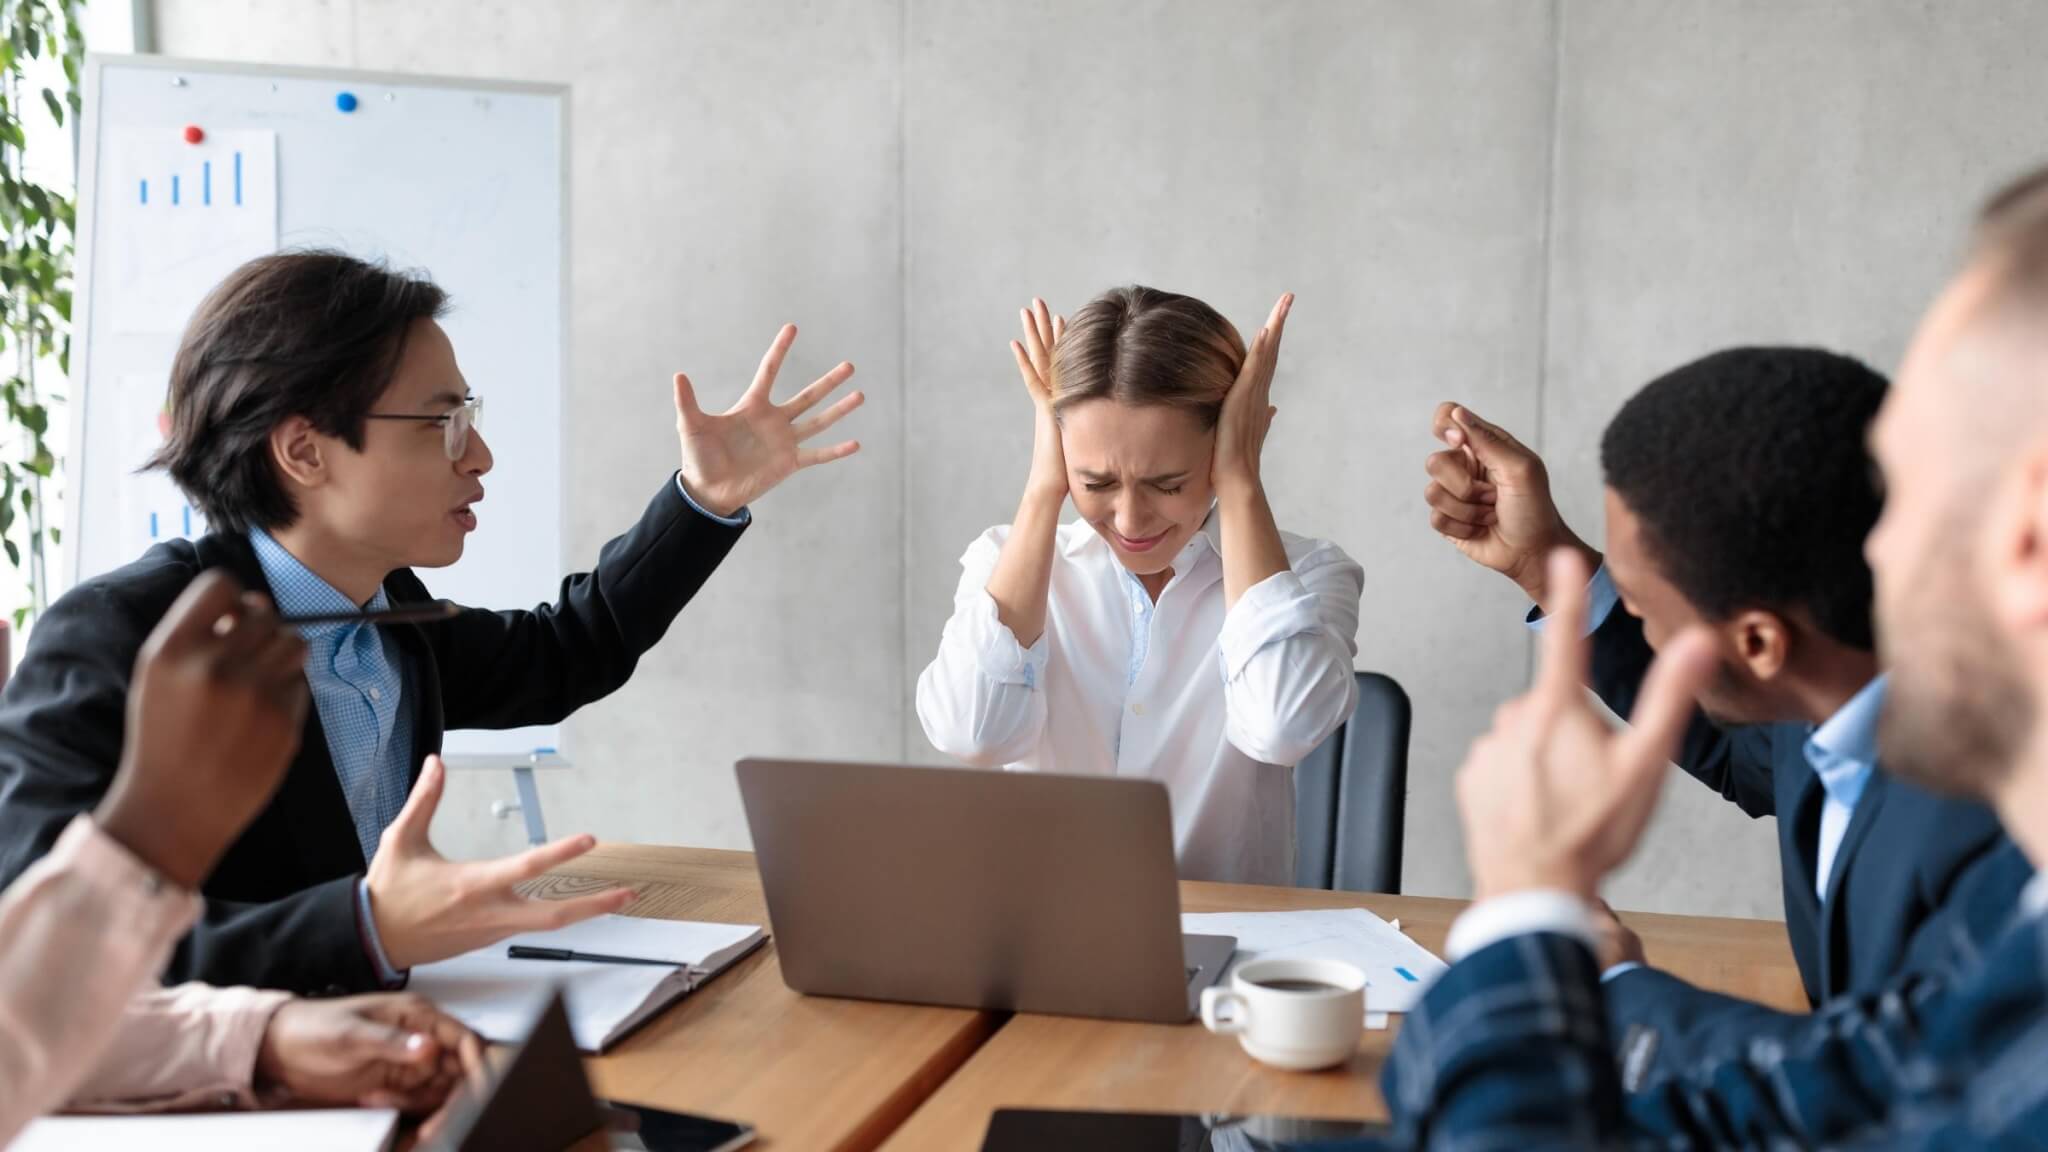 7 Suggestions on How to Handle Conflict in a Meeting